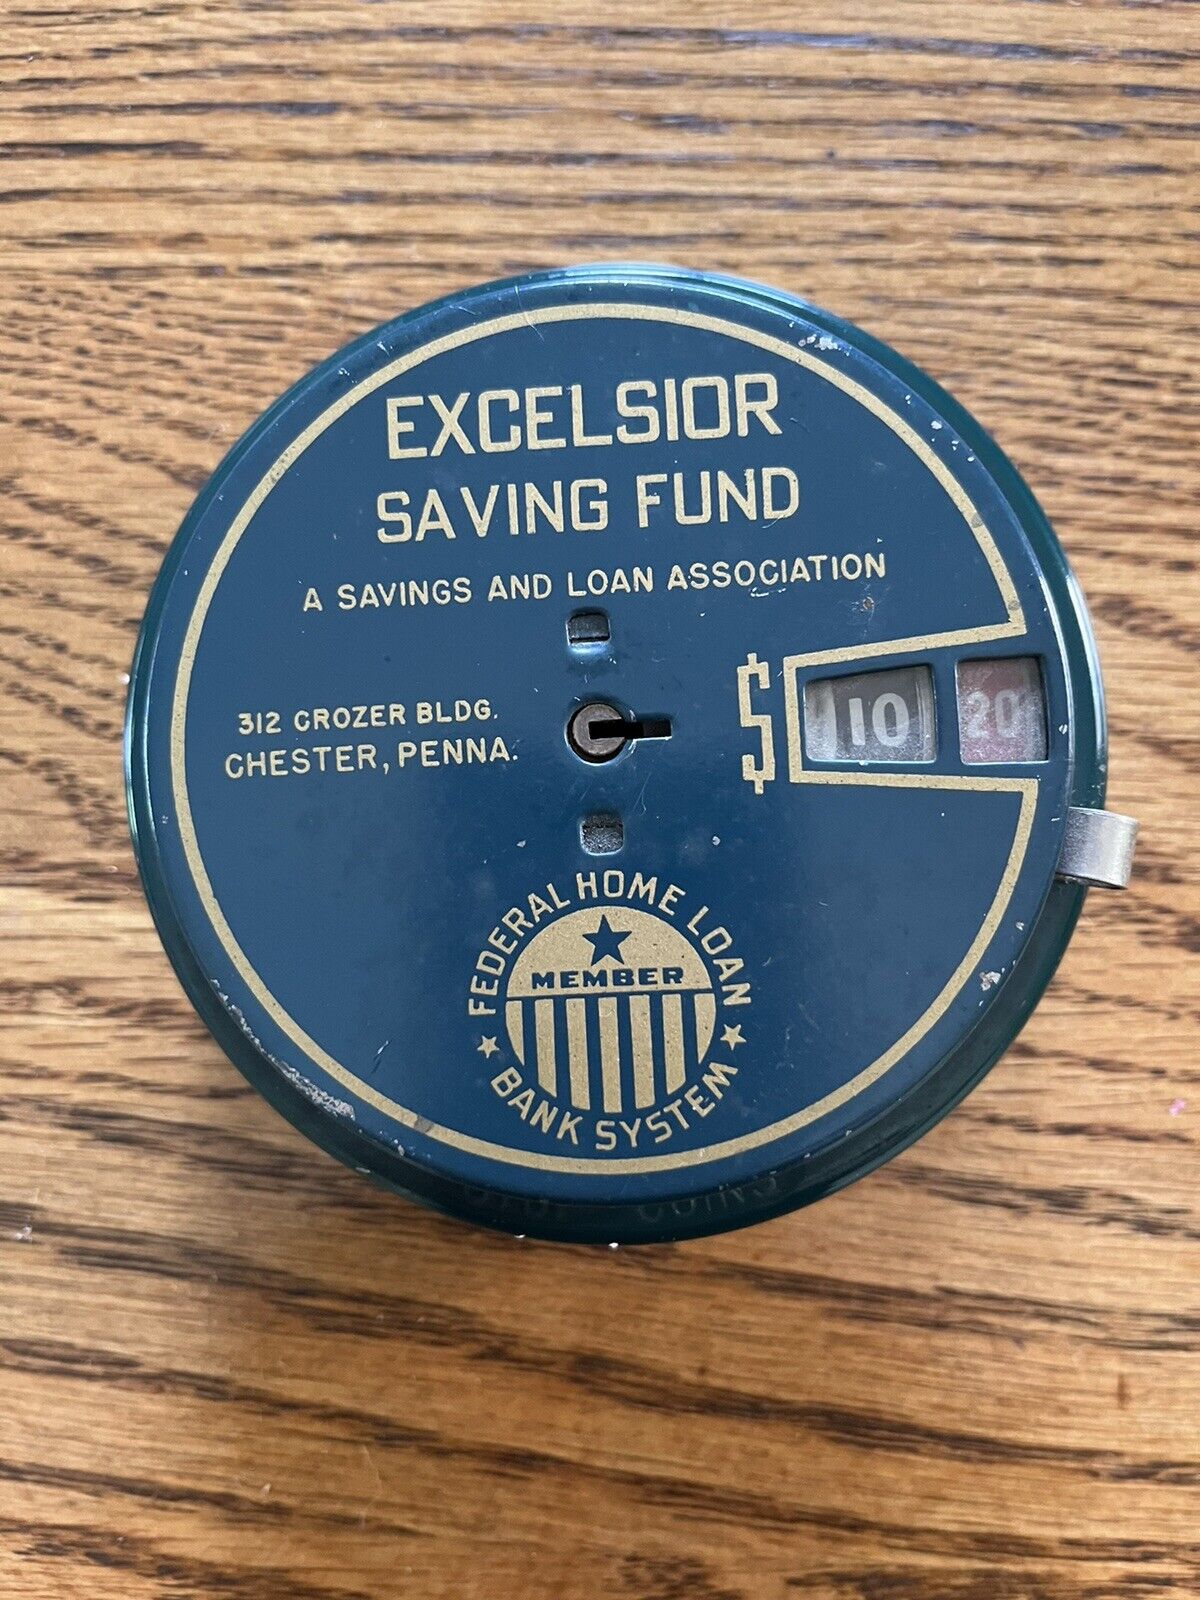 Excelsior Savings Fund Metal Bank Chester, Pennsylvania